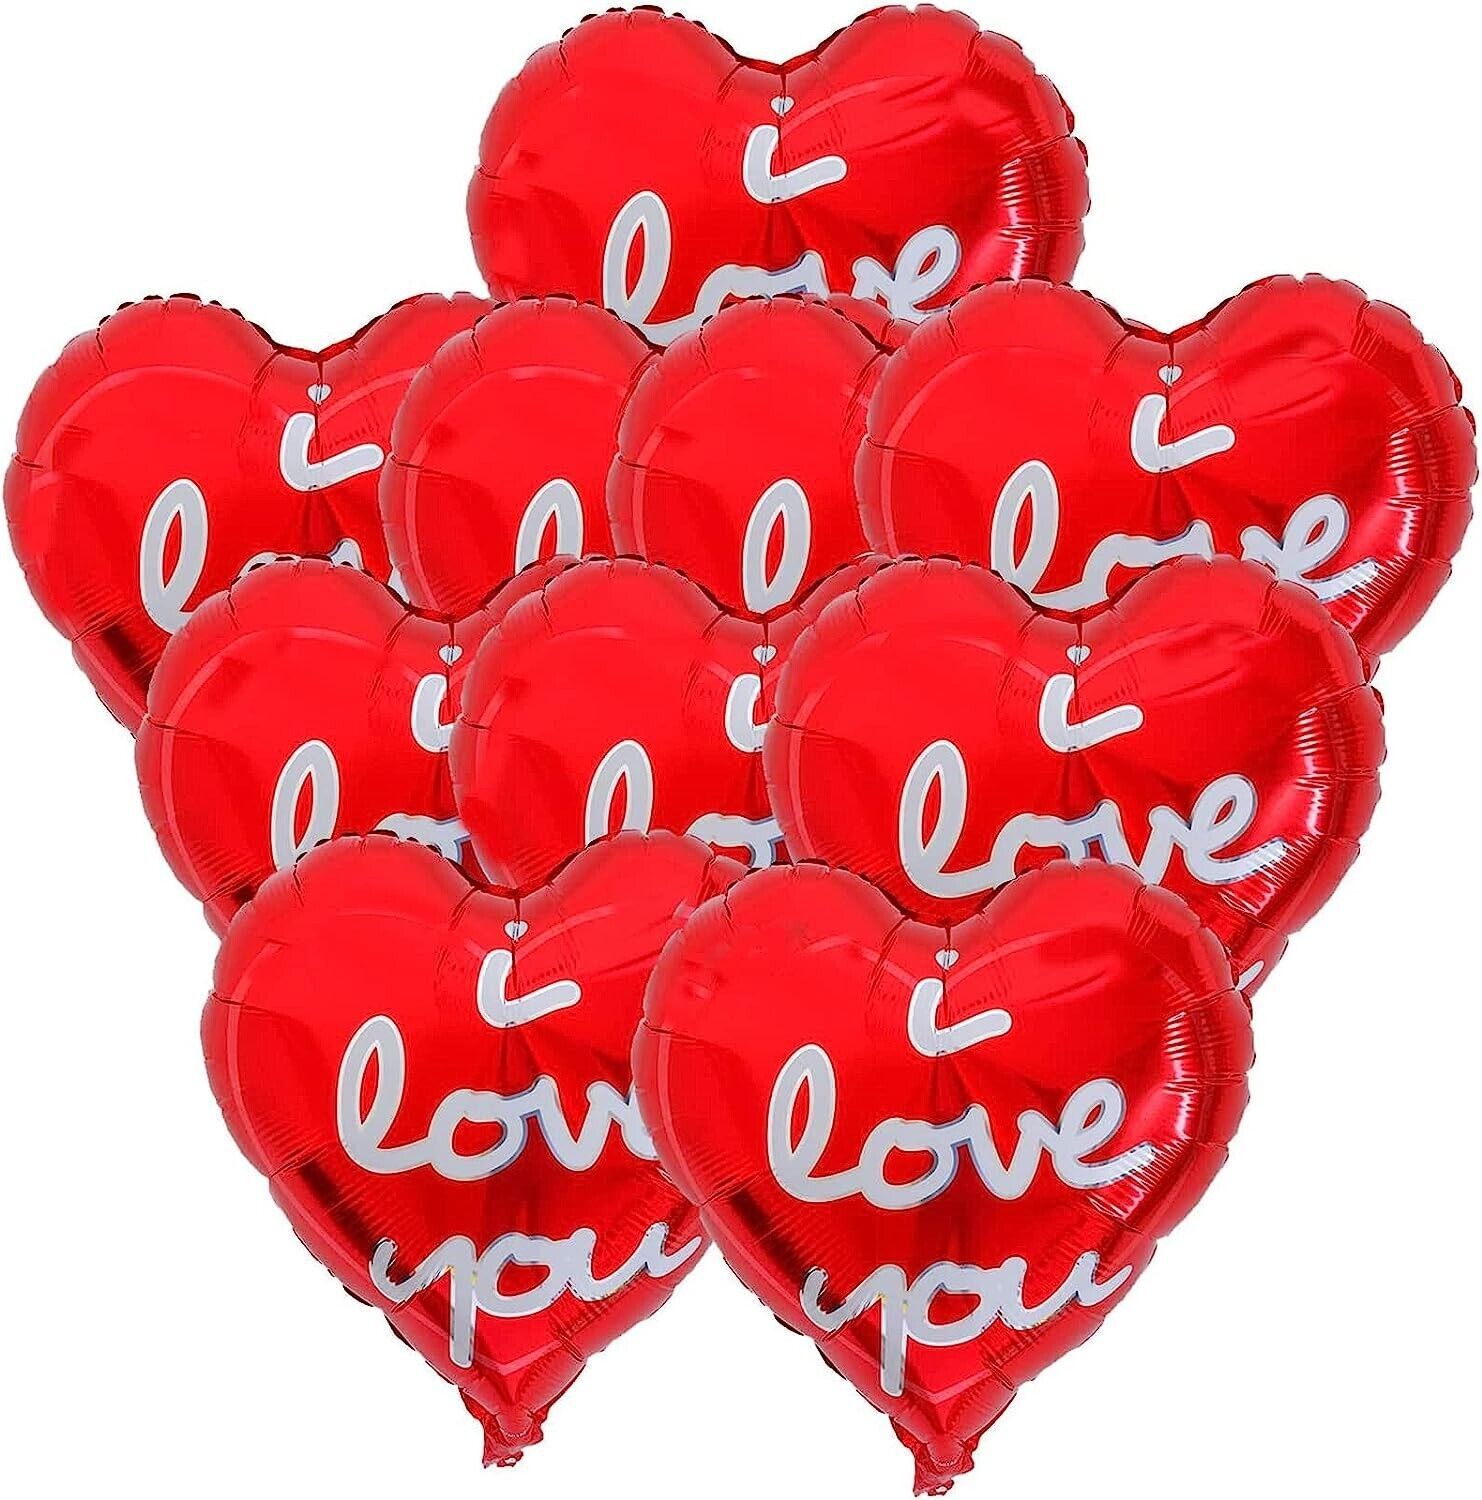 Primary image for 18inch Decorations Balloons, Love Heart Foil Balloons, i Love You Balloon, 10Pcs